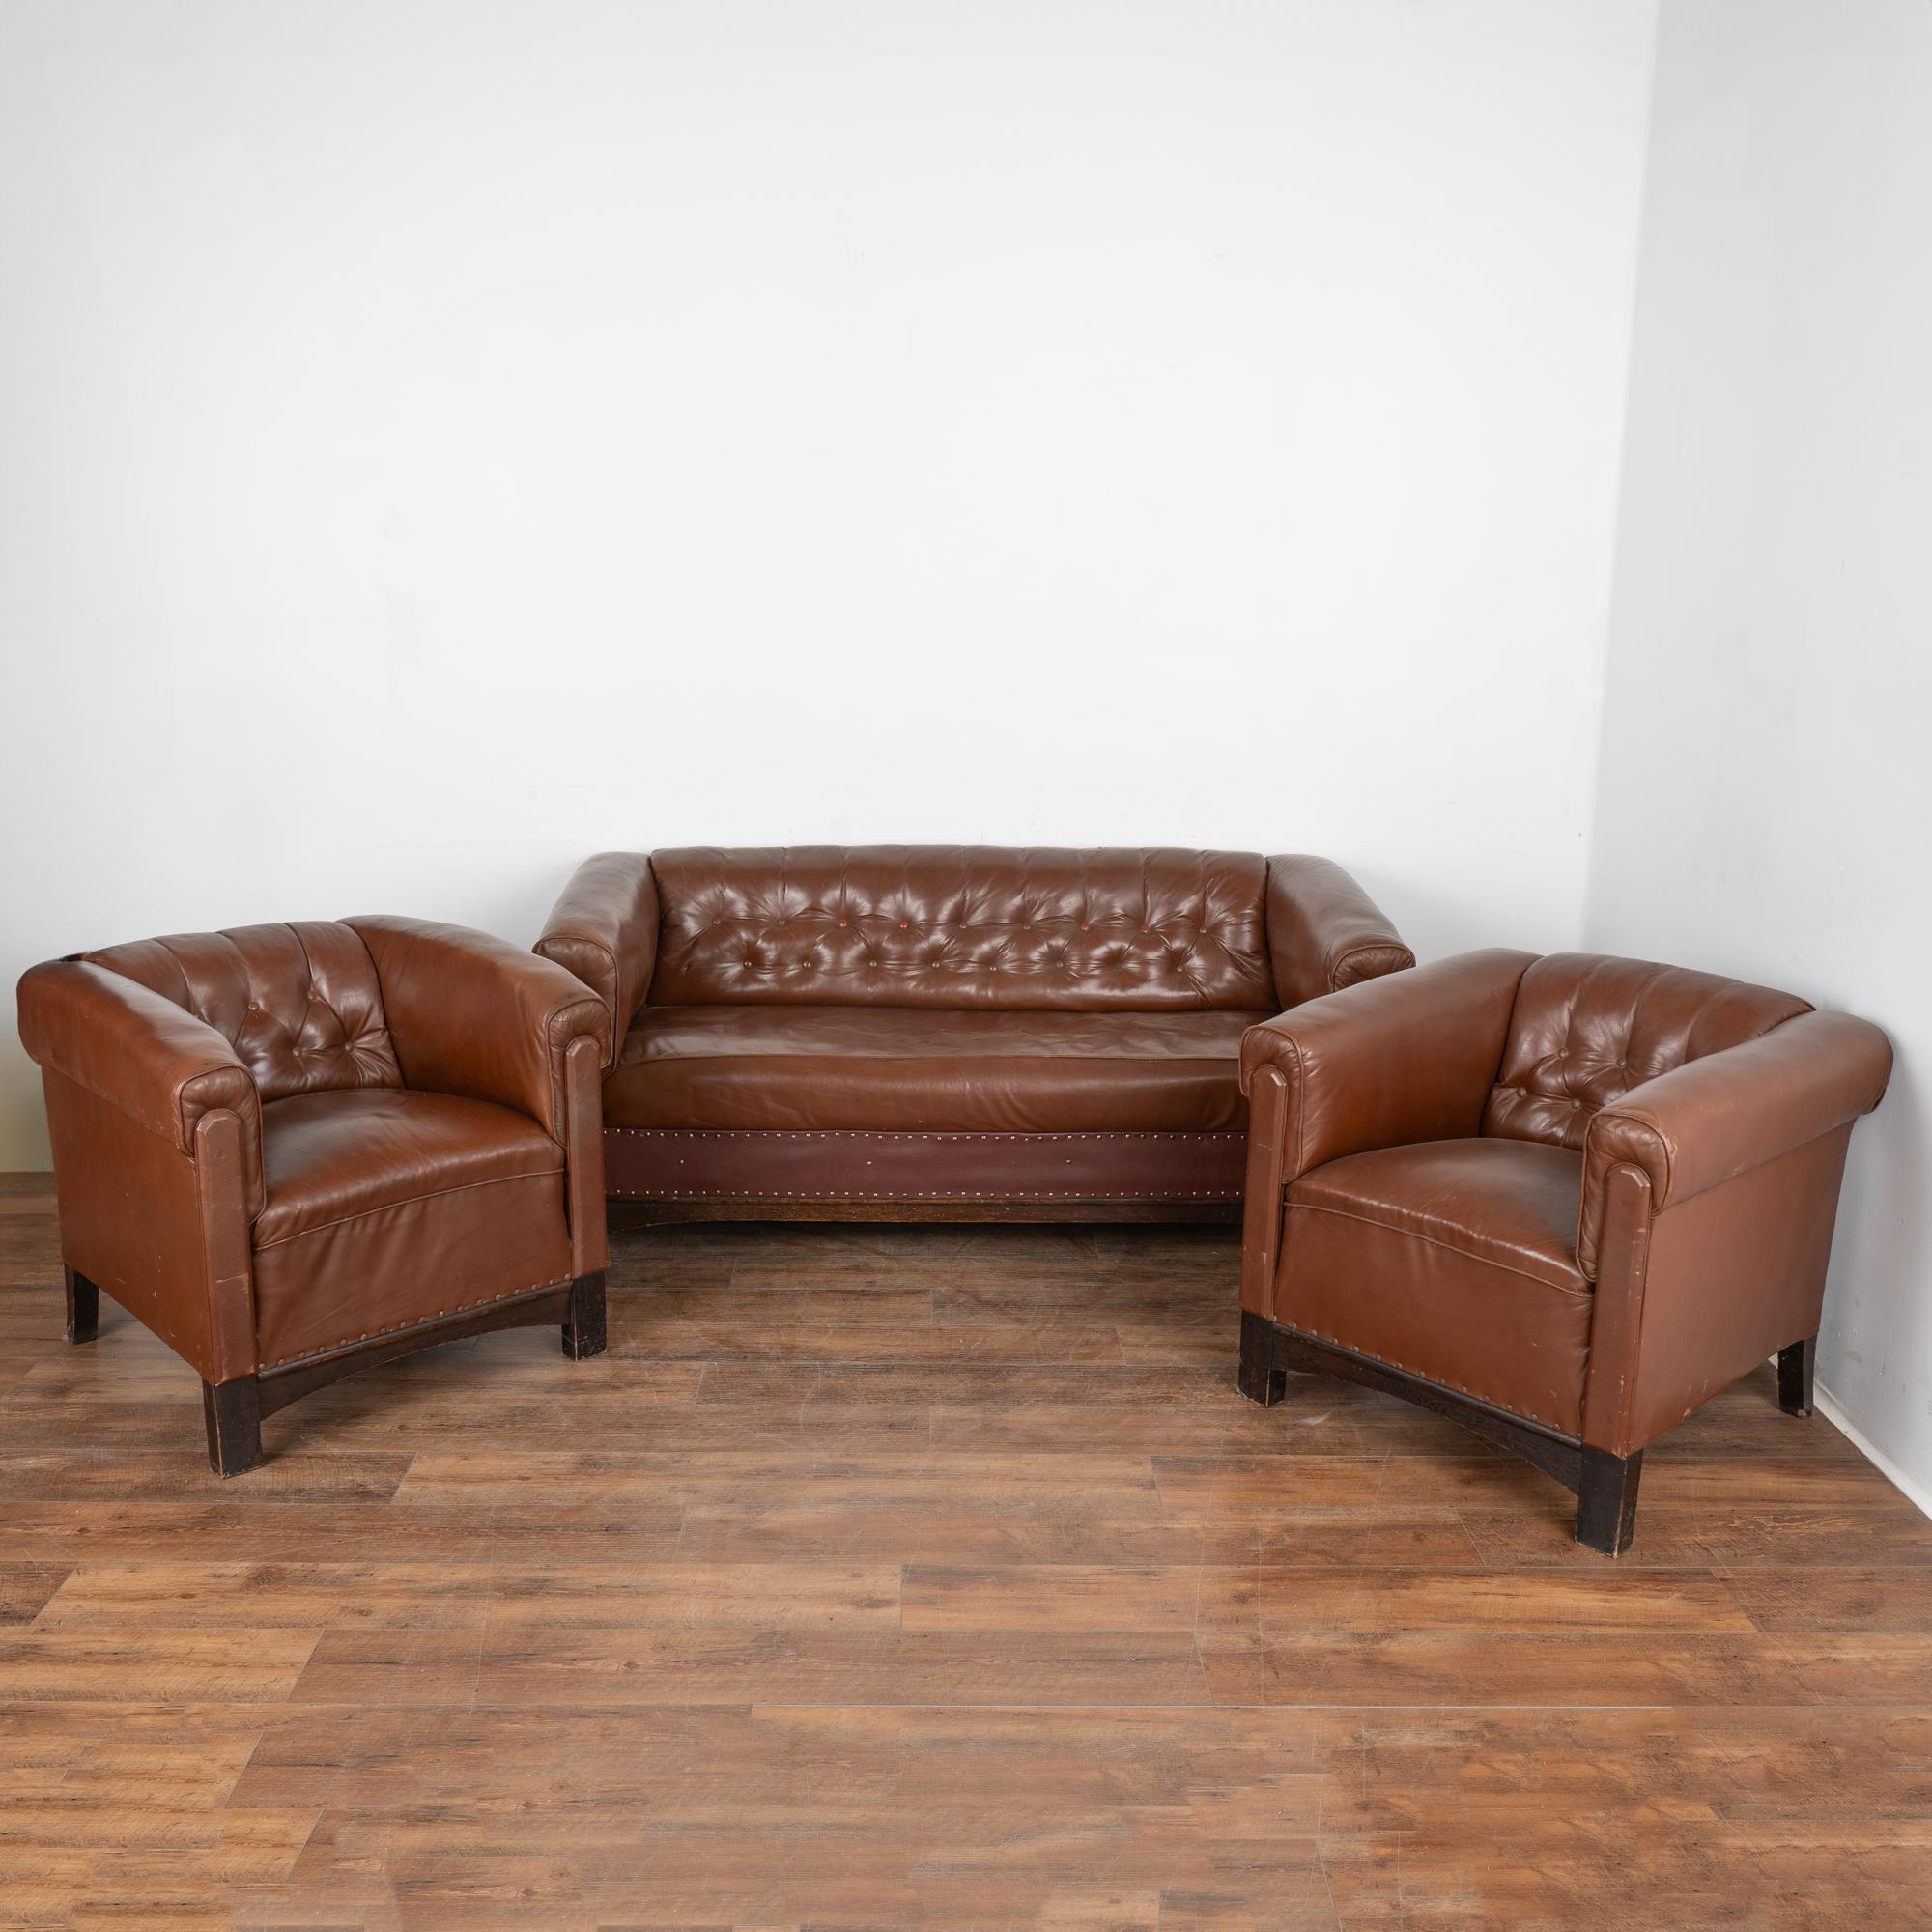 Set (3) vintage brown leather sofa and pair of club arm chairs.
Sold in original used vintage condition. The brown leather show scuffs, scratches, missing/recovered buttons, impressions, leather on front of sofa has been replaced (note different